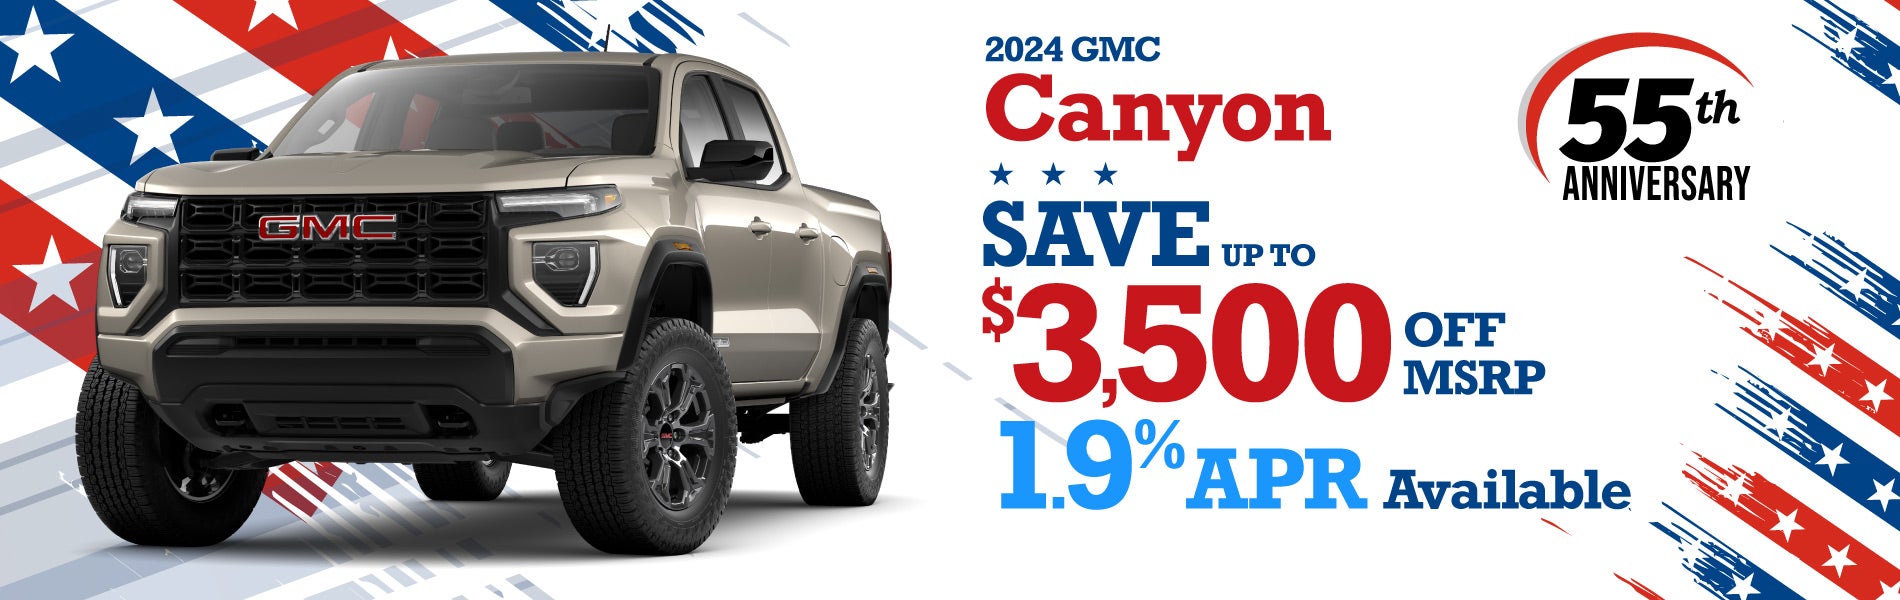 2024 GMC Canyon - up to $3500 Off MSRP